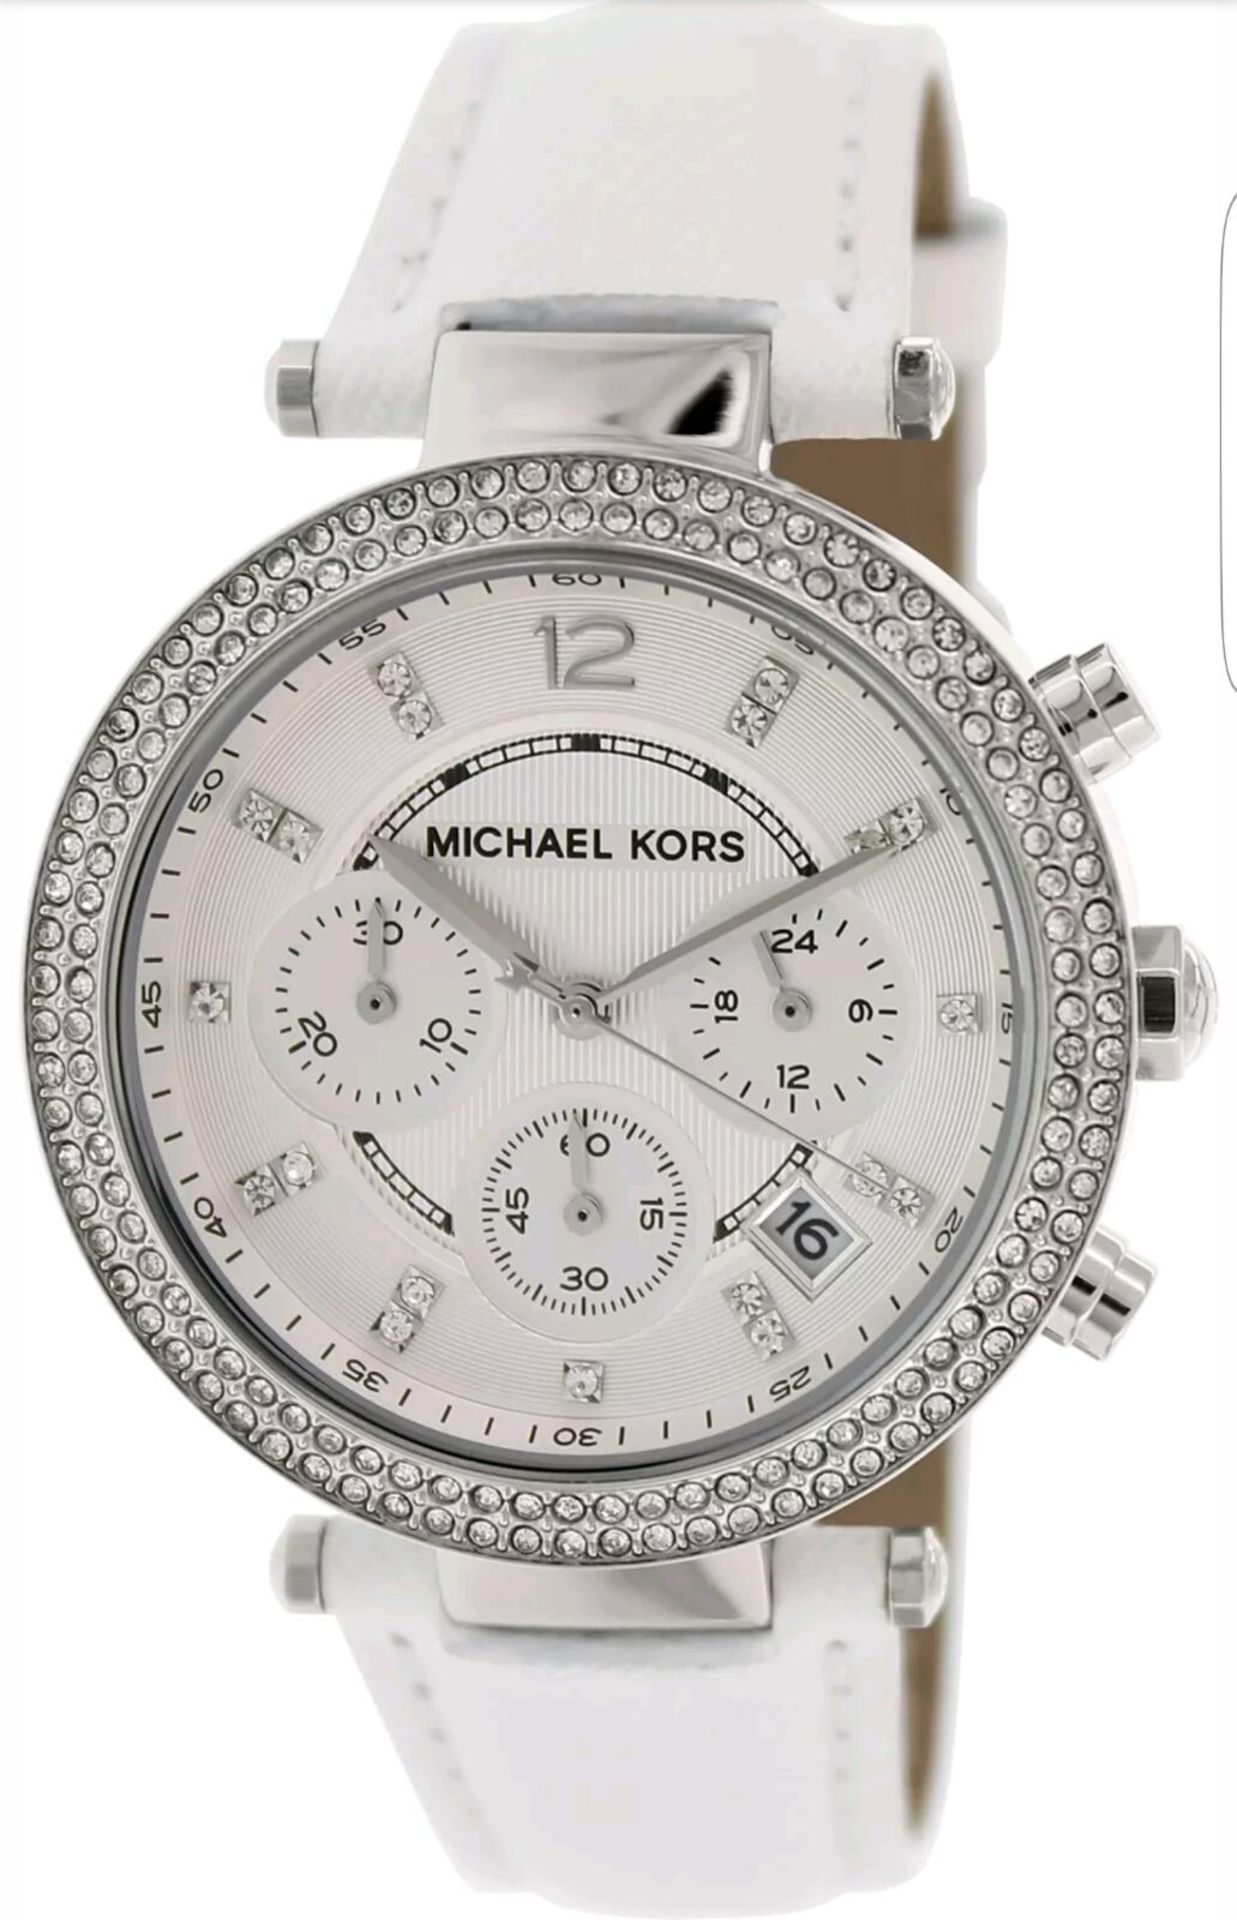 BRAND NEW LADIES MICHAEL KORS MK2277, COMPLETE WITH ORIGINAL PACKAGING AND MANUAL